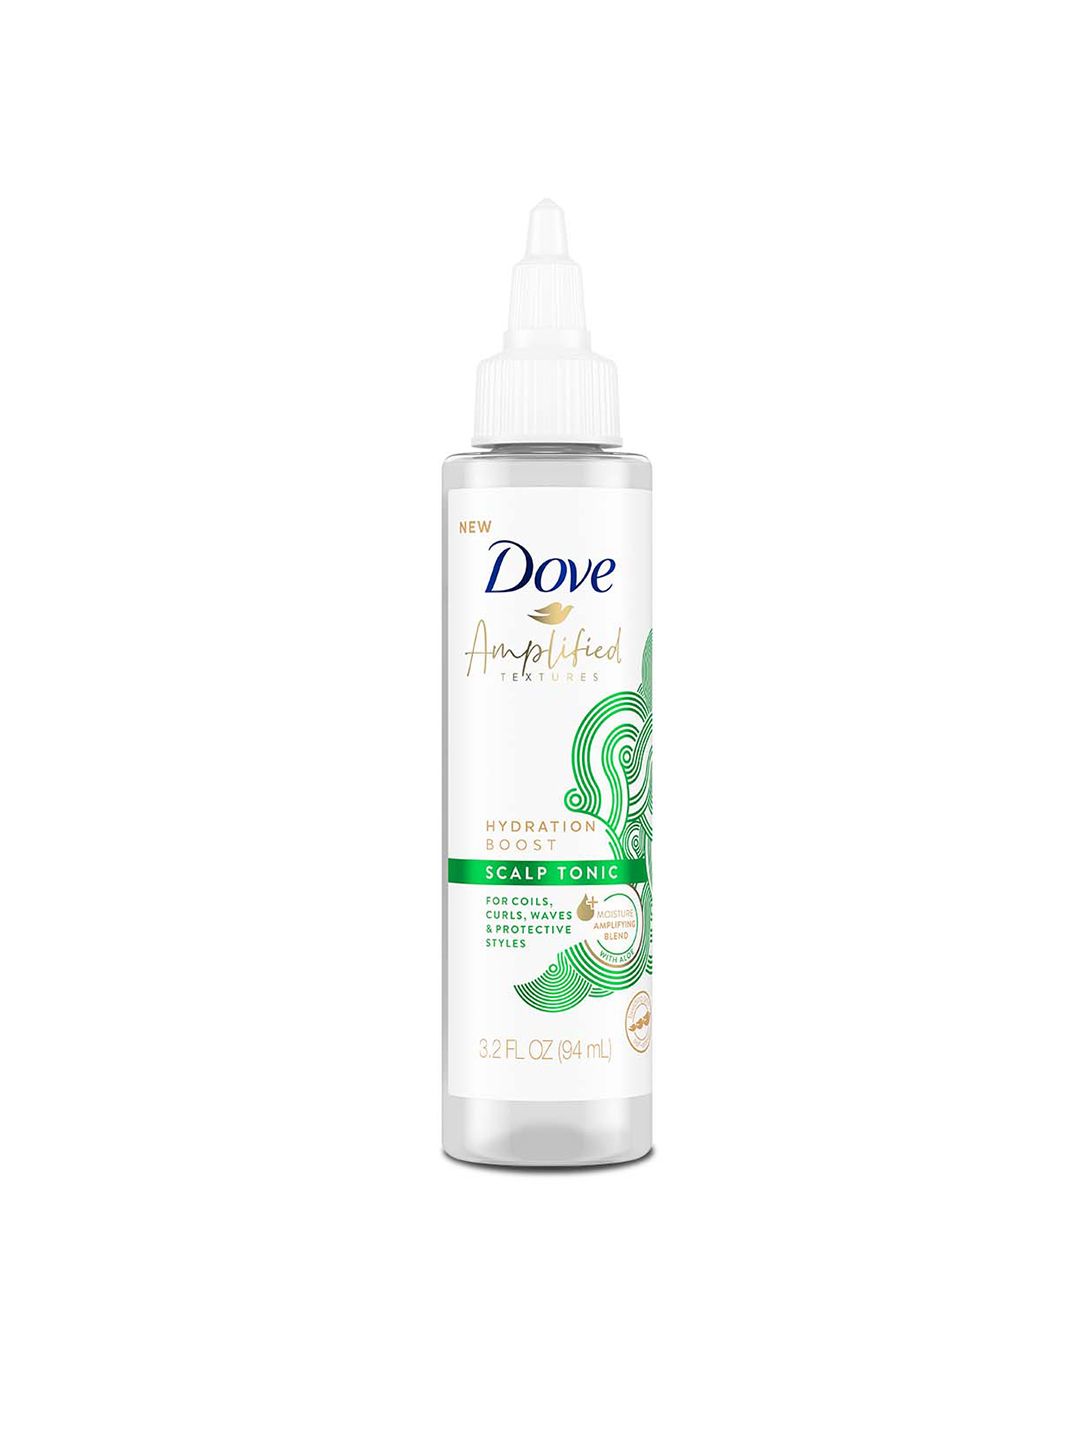 Dove Amplified Textured Hydration Boost Scalp Tonic for Curly Hair - 94 ml Price in India